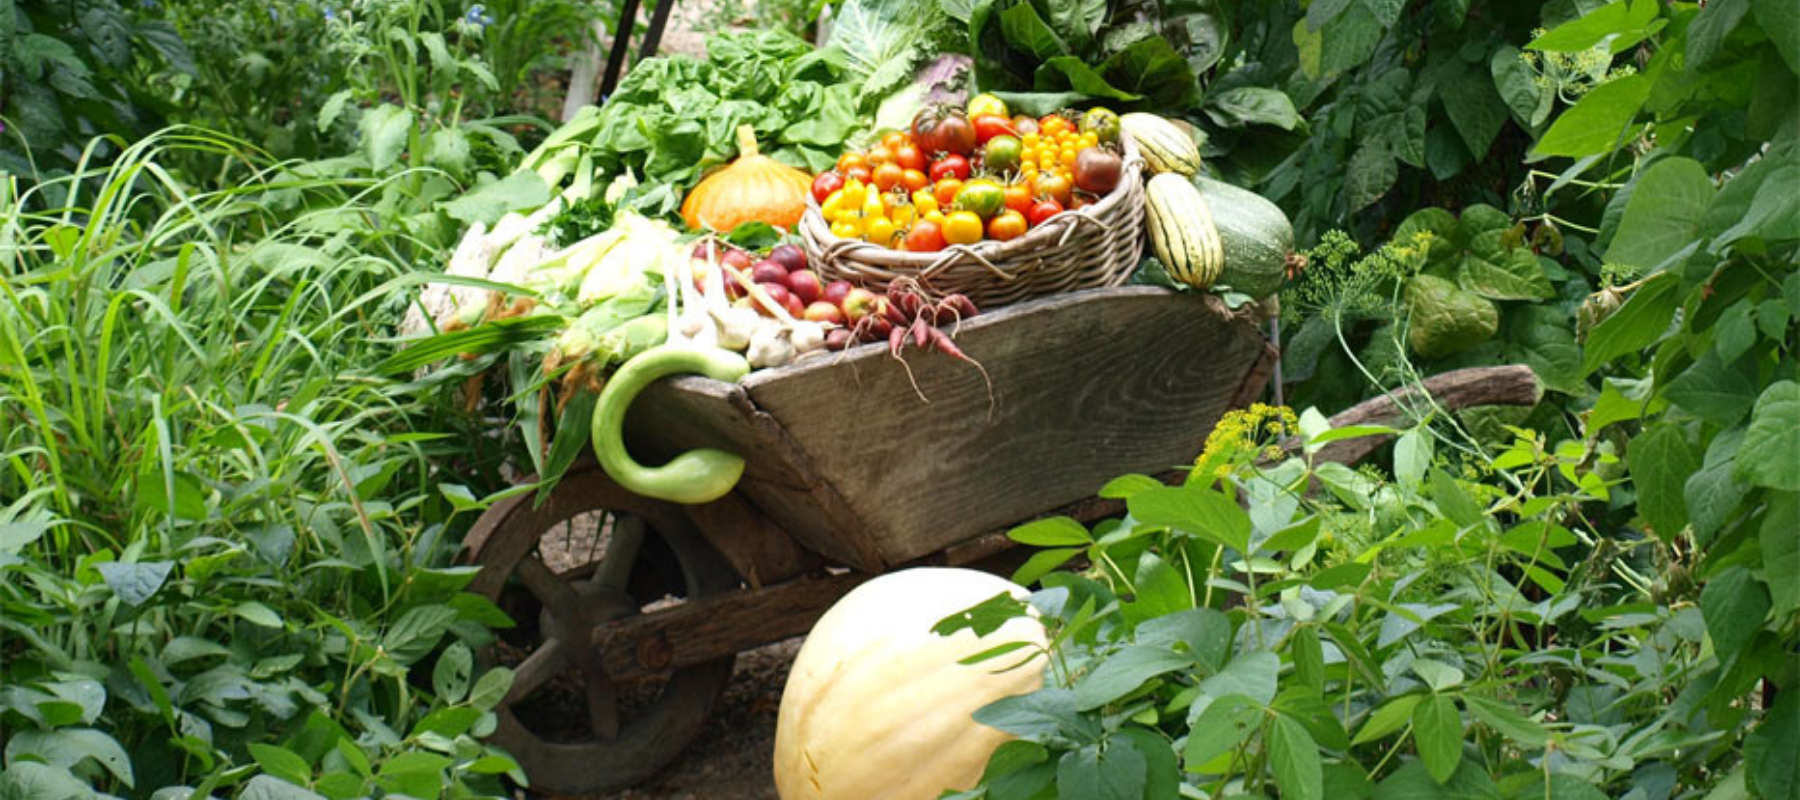 Is gardening the secrete to a long health life?